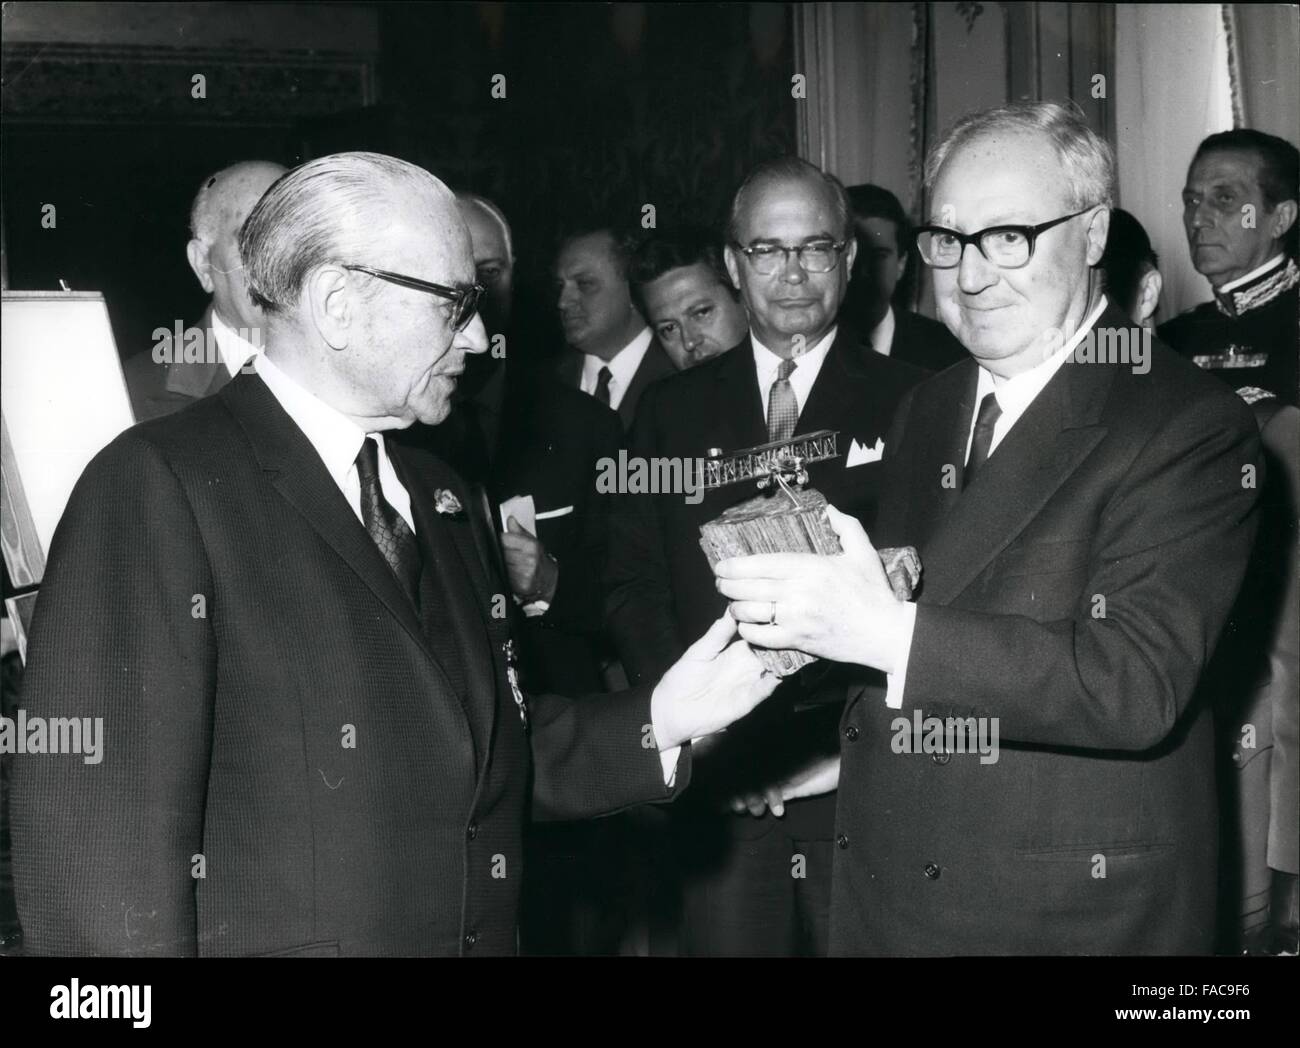 1968 - Italy's President Giuseppe Saragat is presented a silver model of World War I Caproni bomber by Harry Manchester, one of the 14 former U.S. pilots who served in Italy during the World War I. The veterans are the survivors of 449 who graduated from Foggia flying school. Many of them flew bombing missions against Austrian and German positions in Caproni bombers. In those days rated in the same class as the B52's of today. The Caproni was powered by three 150 hp engines, and could make a top speed of about 100 mph. © Keystone Pictures USA/ZUMAPRESS.com/Alamy Live News Stock Photo